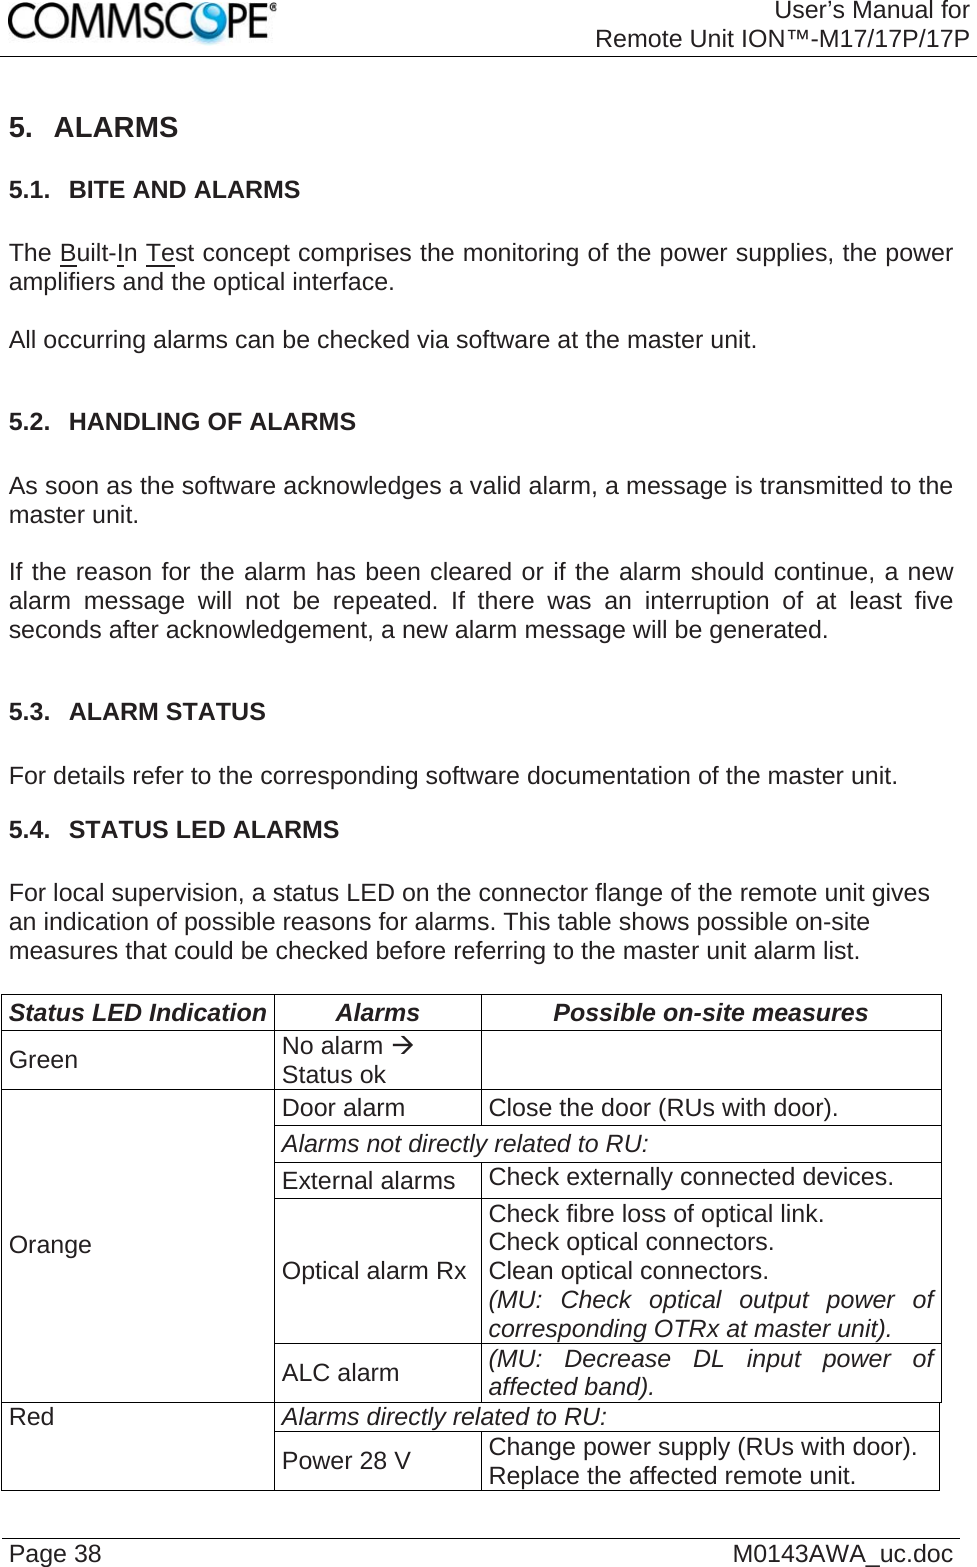 User’s Manual forRemote Unit ION™-M17/17P/17P Page 38  M0143AWA_uc.doc 5. ALARMS 5.1.  BITE AND ALARMS  The Built-In Test concept comprises the monitoring of the power supplies, the power amplifiers and the optical interface.  All occurring alarms can be checked via software at the master unit.  5.2.  HANDLING OF ALARMS  As soon as the software acknowledges a valid alarm, a message is transmitted to the master unit.  If the reason for the alarm has been cleared or if the alarm should continue, a new alarm message will not be repeated. If there was an interruption of at least five seconds after acknowledgement, a new alarm message will be generated.  5.3.  ALARM STATUS  For details refer to the corresponding software documentation of the master unit. 5.4.  STATUS LED ALARMS  For local supervision, a status LED on the connector flange of the remote unit gives an indication of possible reasons for alarms. This table shows possible on-site measures that could be checked before referring to the master unit alarm list.  Status LED Indication  Alarms  Possible on-site measures Green  No alarm Æ Status ok   Door alarm  Close the door (RUs with door). Alarms not directly related to RU:  External alarms  Check externally connected devices. Optical alarm Rx Check fibre loss of optical link. Check optical connectors. Clean optical connectors. (MU: Check optical output power of corresponding OTRx at master unit). Orange ALC alarm  (MU: Decrease DL input power of affected band). Alarms directly related to RU: Red Power 28 V  Change power supply (RUs with door). Replace the affected remote unit. 